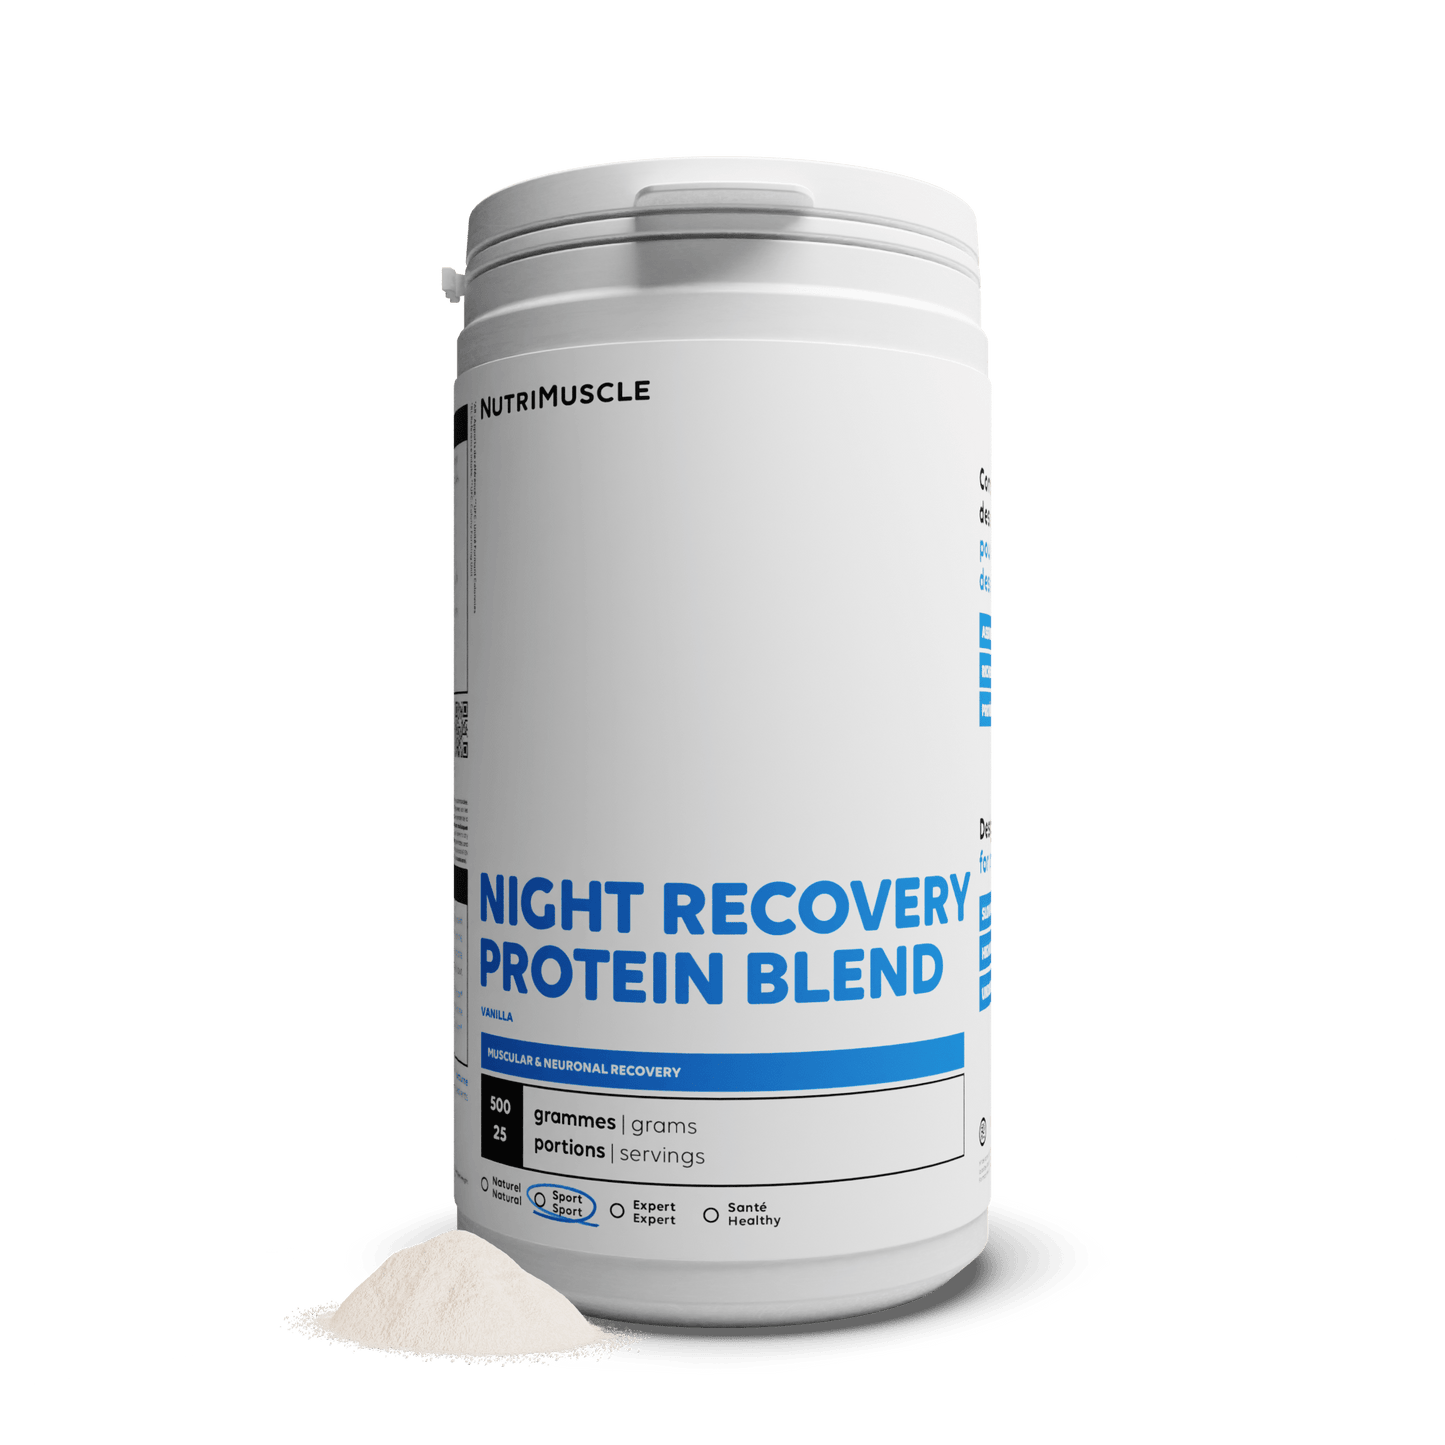 Nutrimuscle Protéines Vanille / 500 g Night Recovery Protein Blend